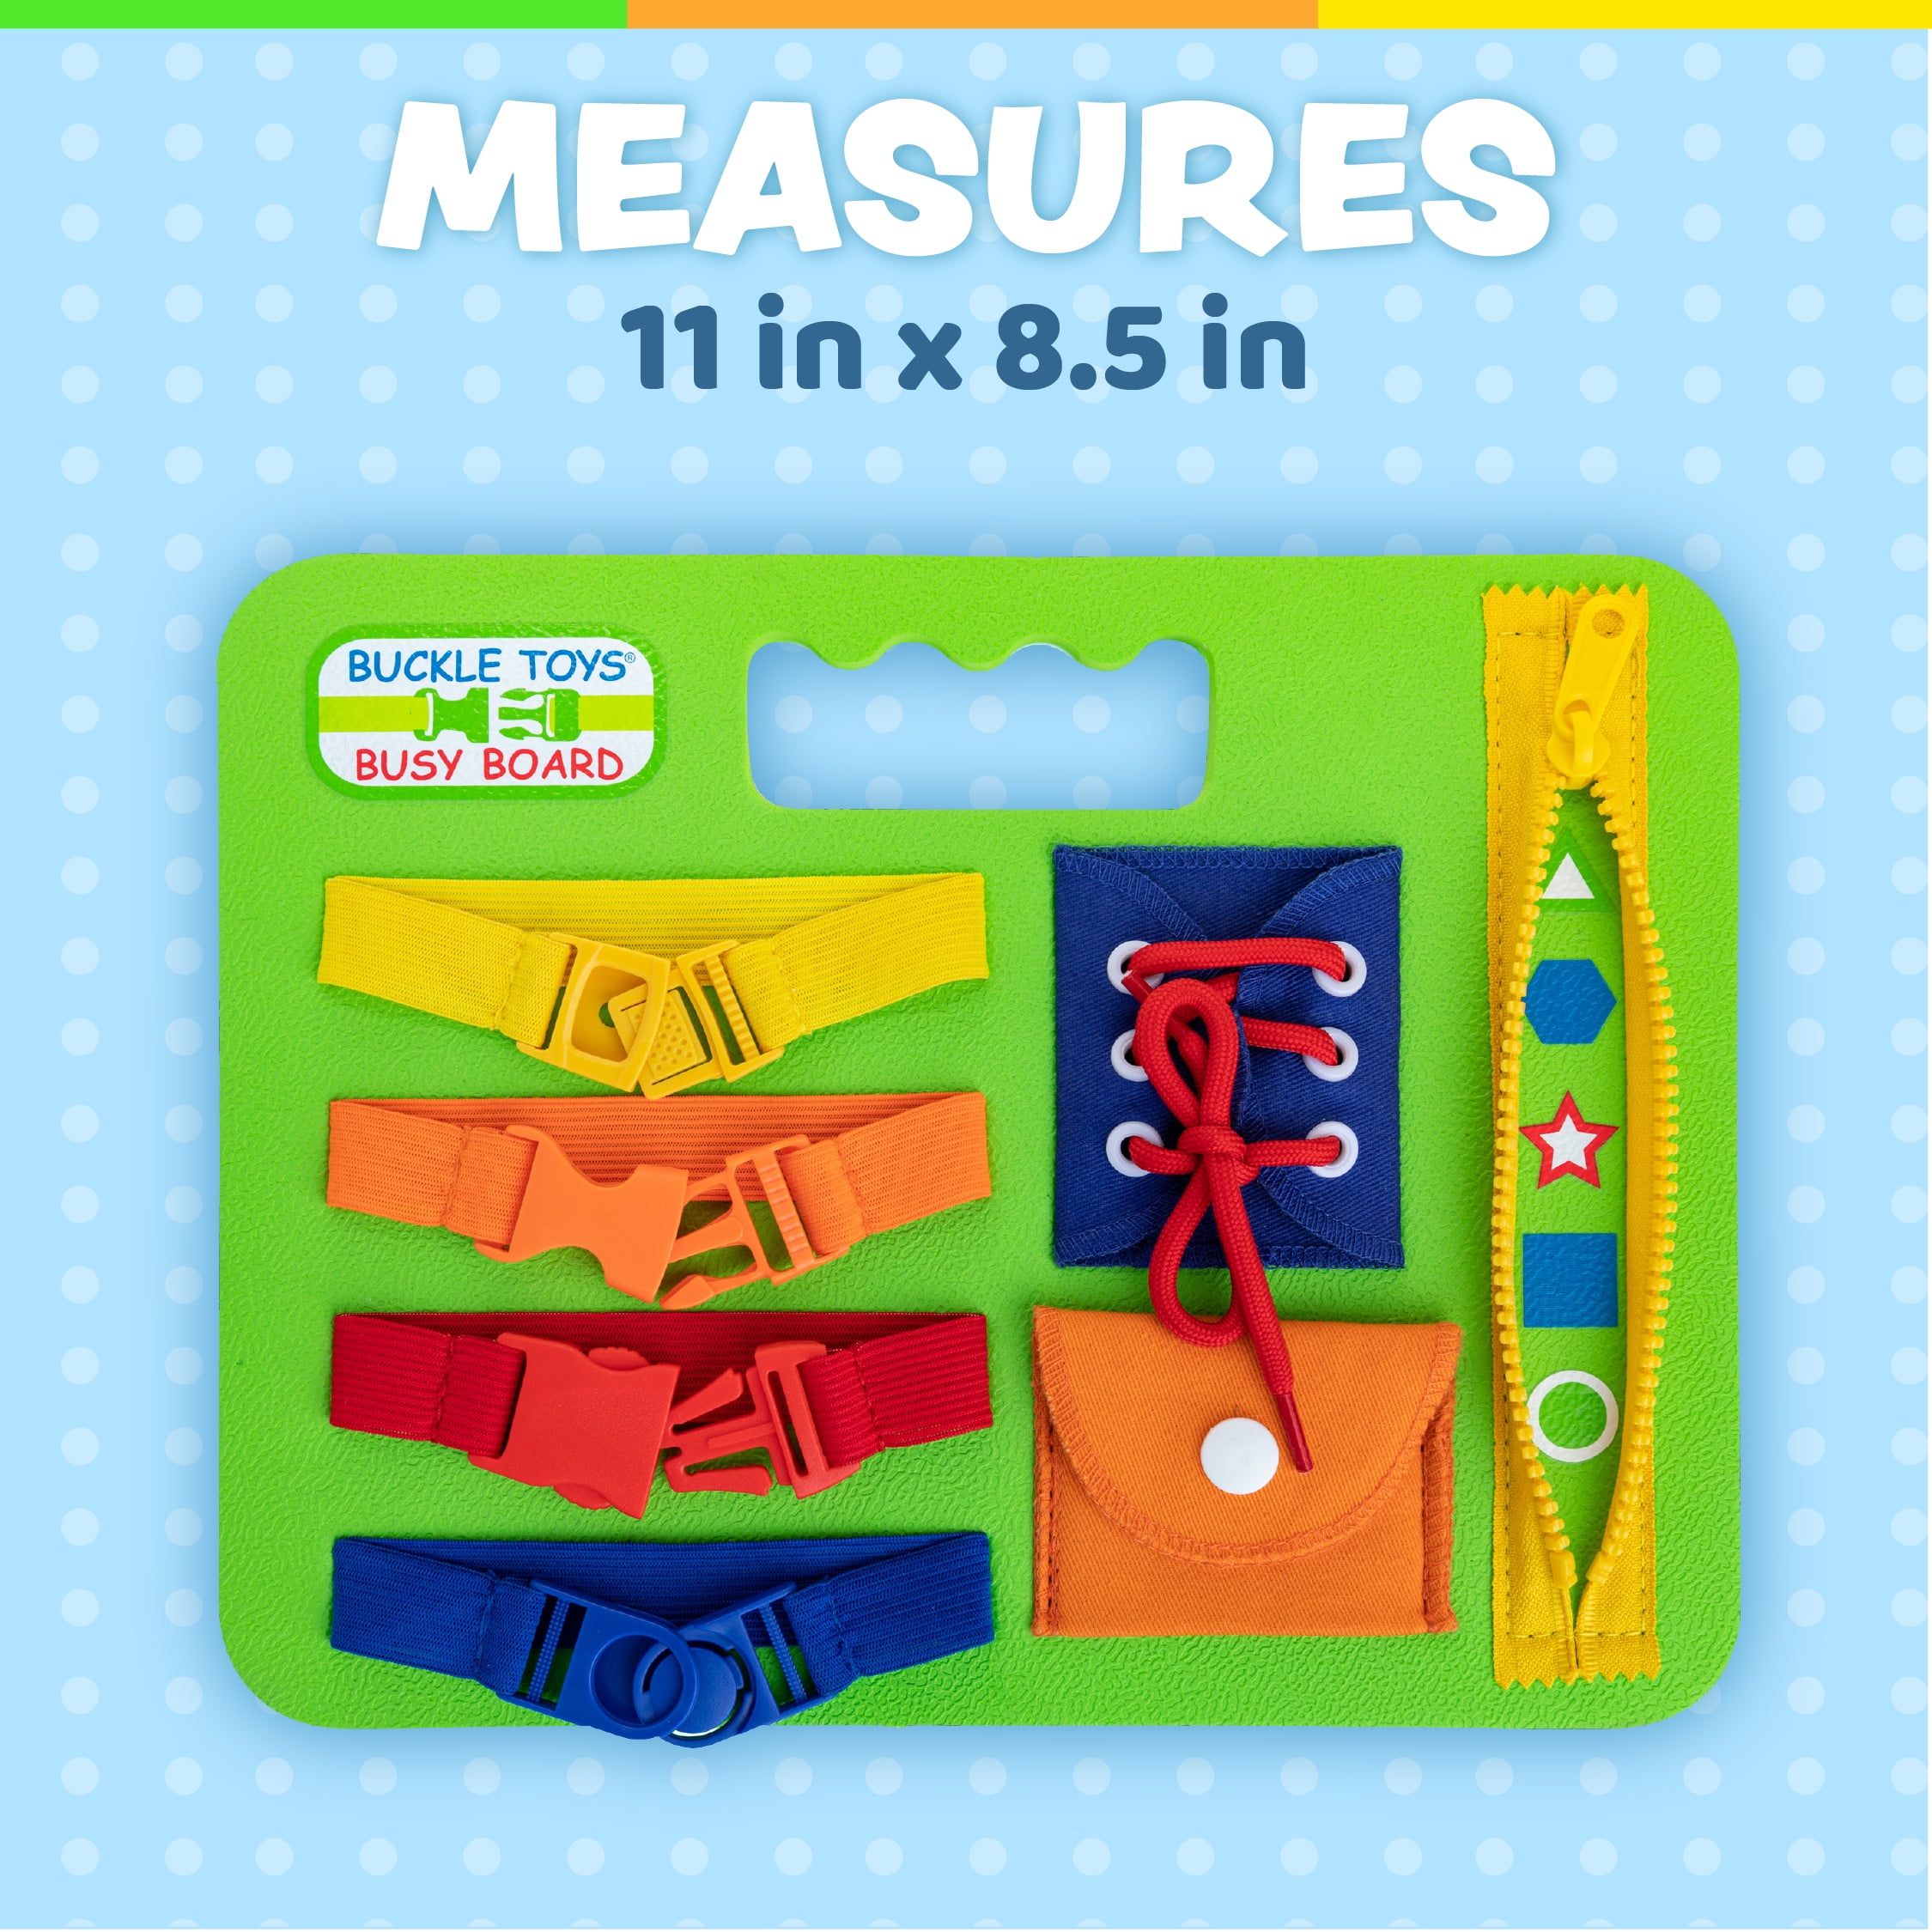 Buckle Toy Busy Board - Learn to Snap, Zip, Tie Shoe Laces and Buckle